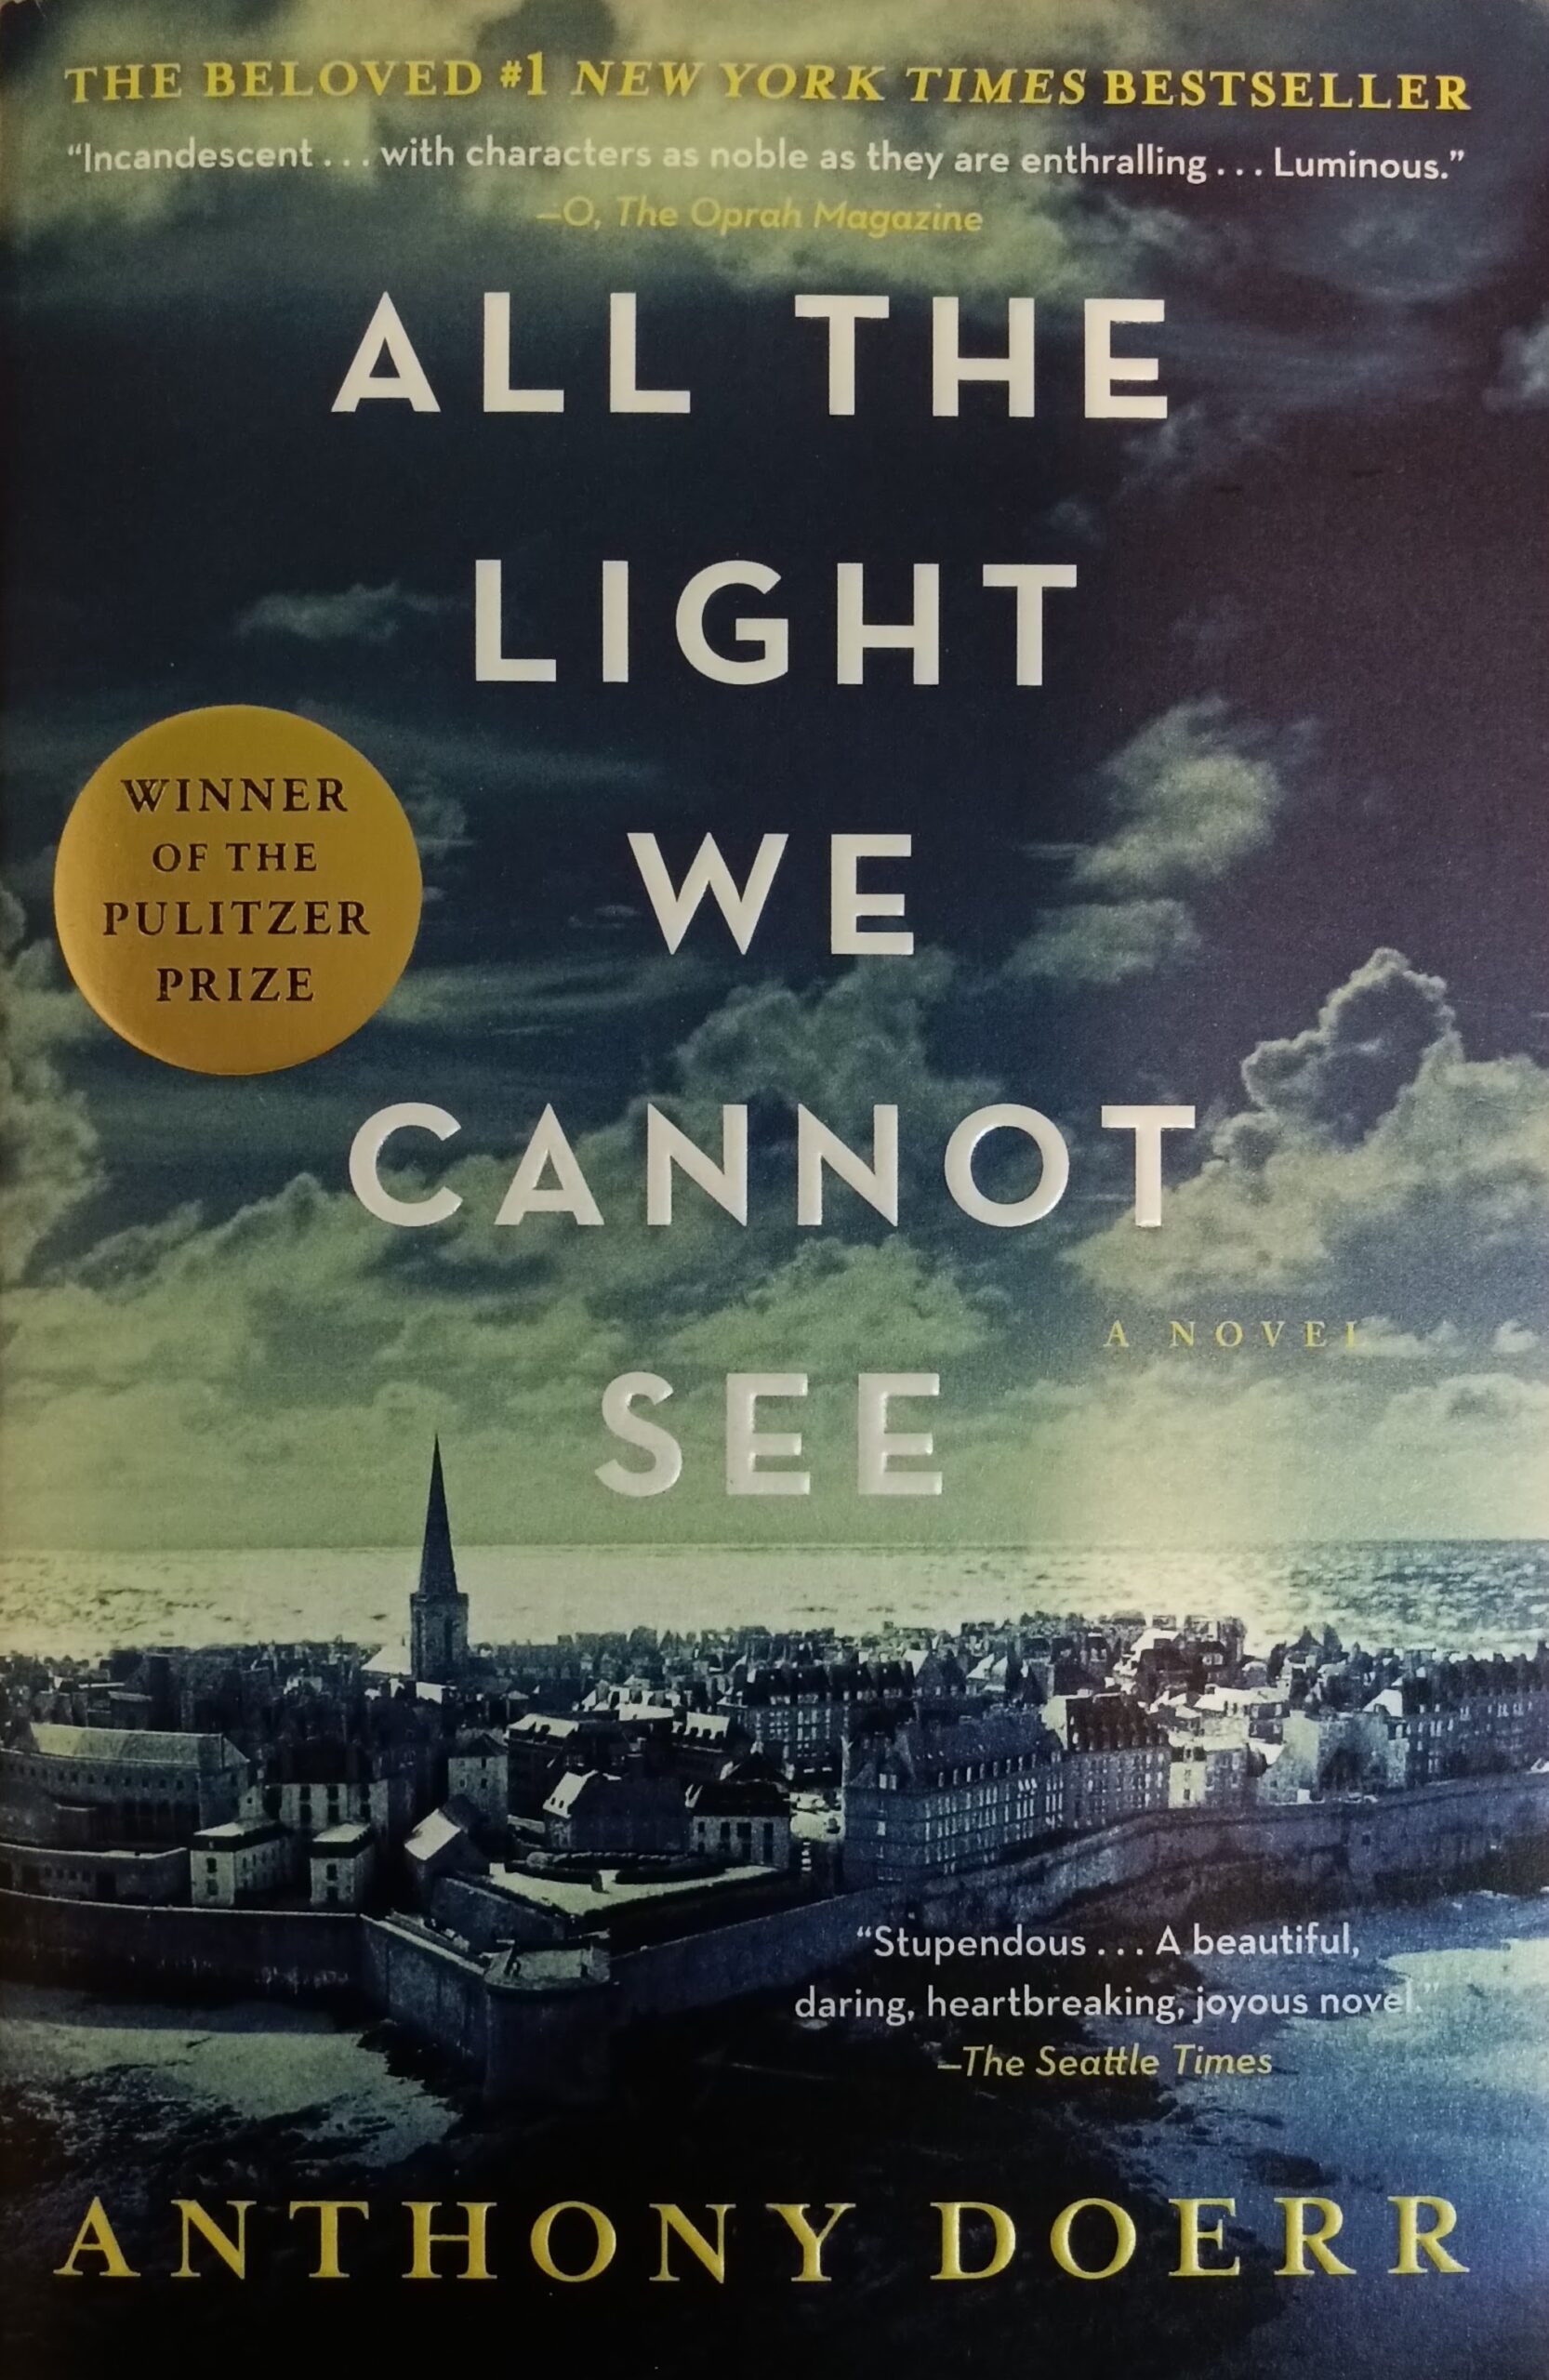 All the light we cannot see Anthony Doerr